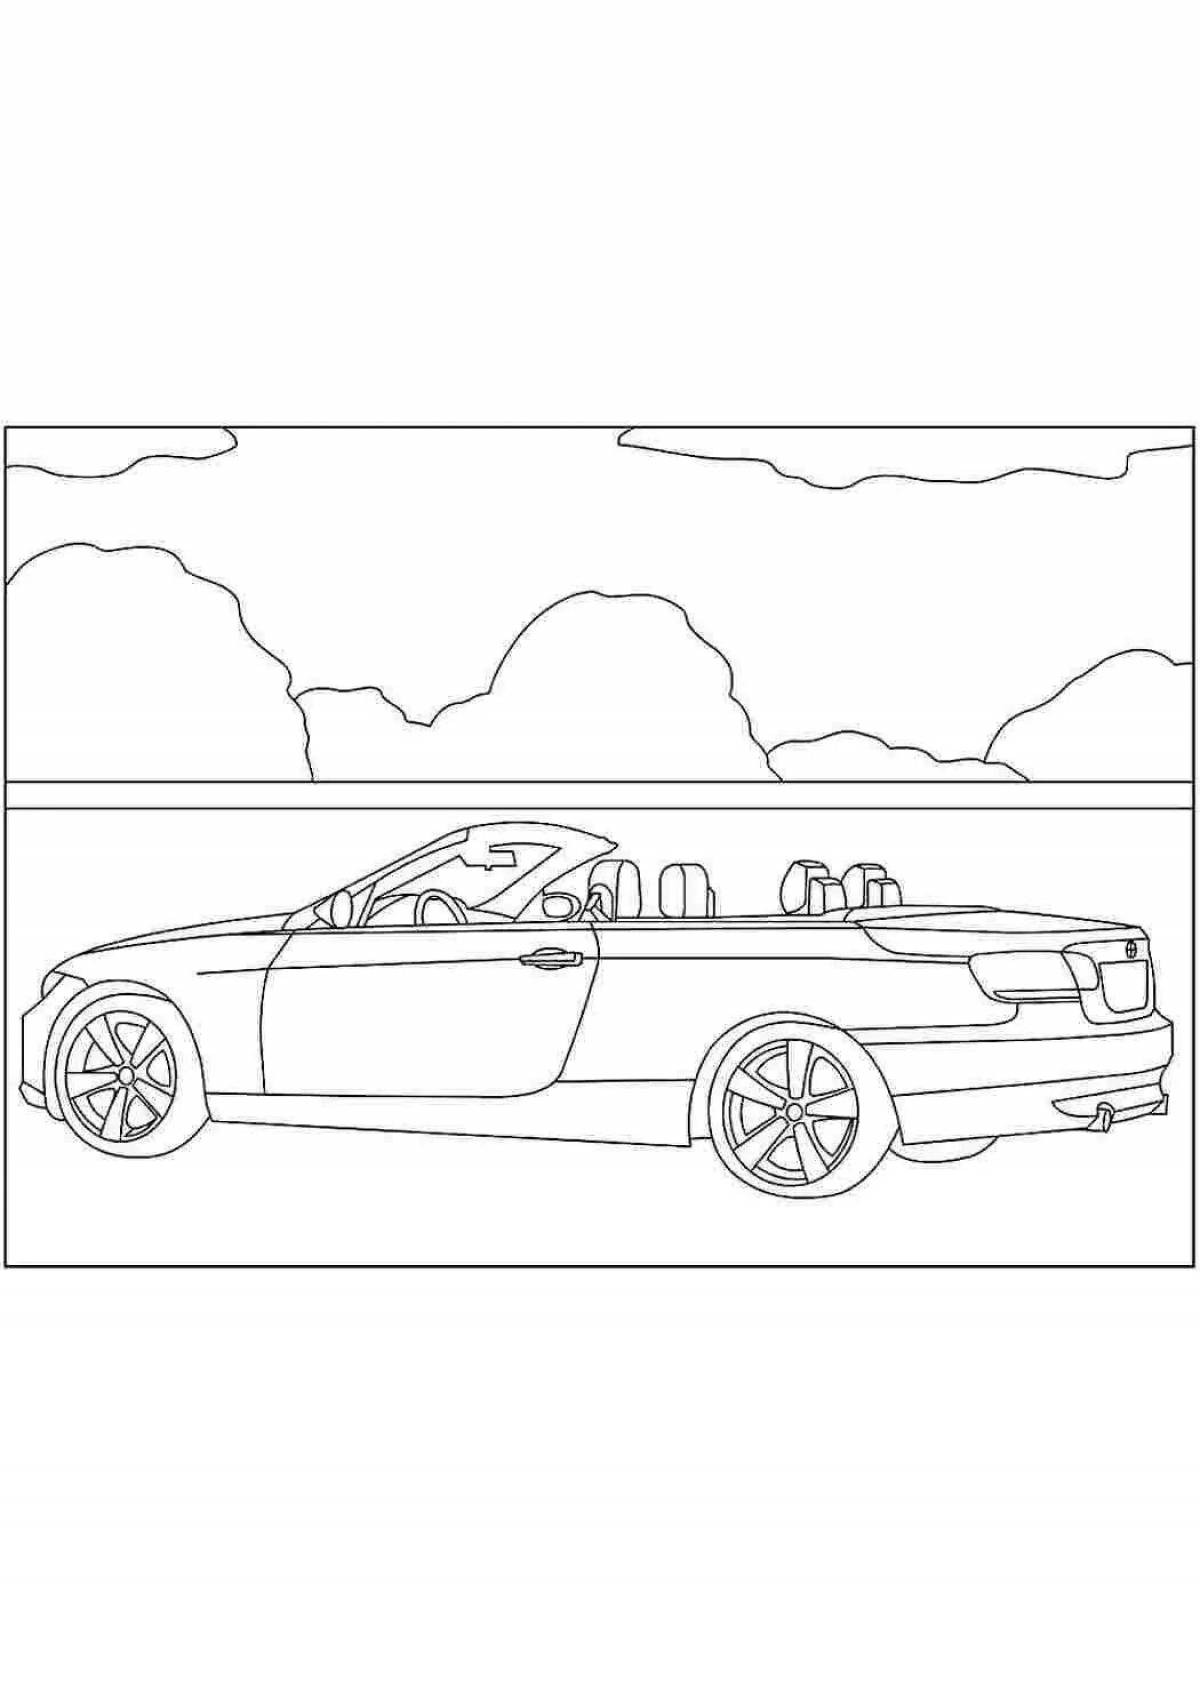 Coloring page cheerful cabriolet